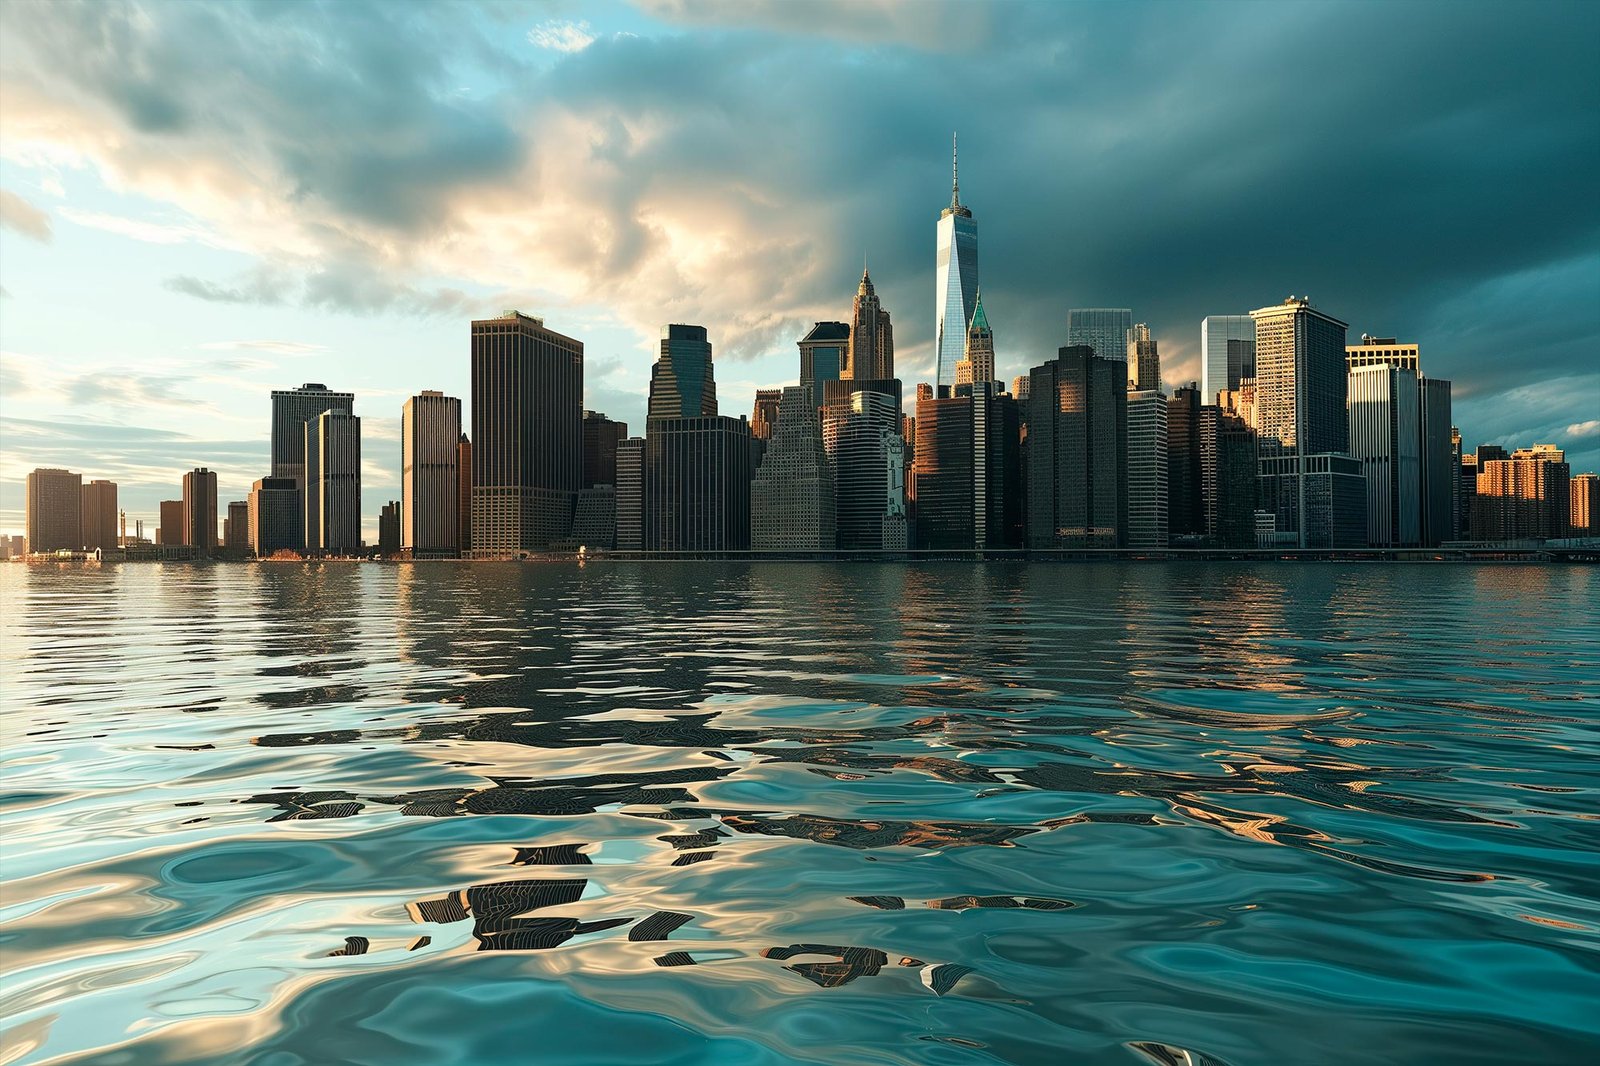 Major East Coast Cities Including NYC and DC Rapidly Sinking